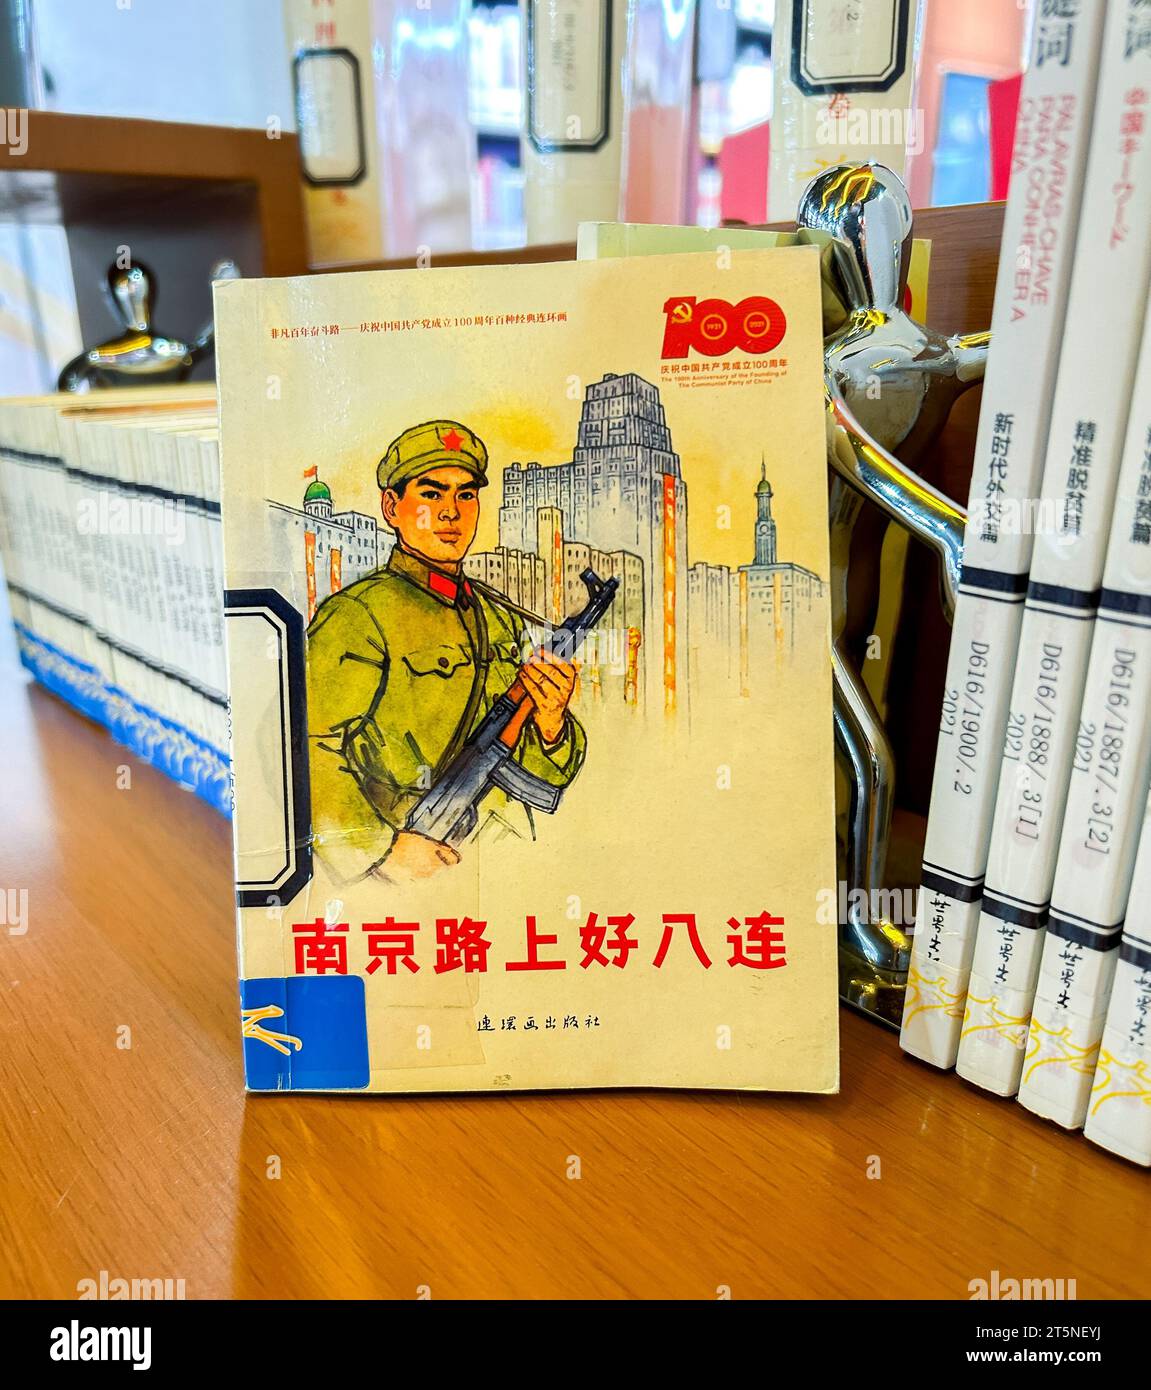 Beijing, China, Detail, Chinese Propaganda History Book on Display inside of Beijing Daxing International Airport, inside Chinese Bookstore, 'Capital Library of China' 'Good Eight Company on Nanjing Road' Stock Photo